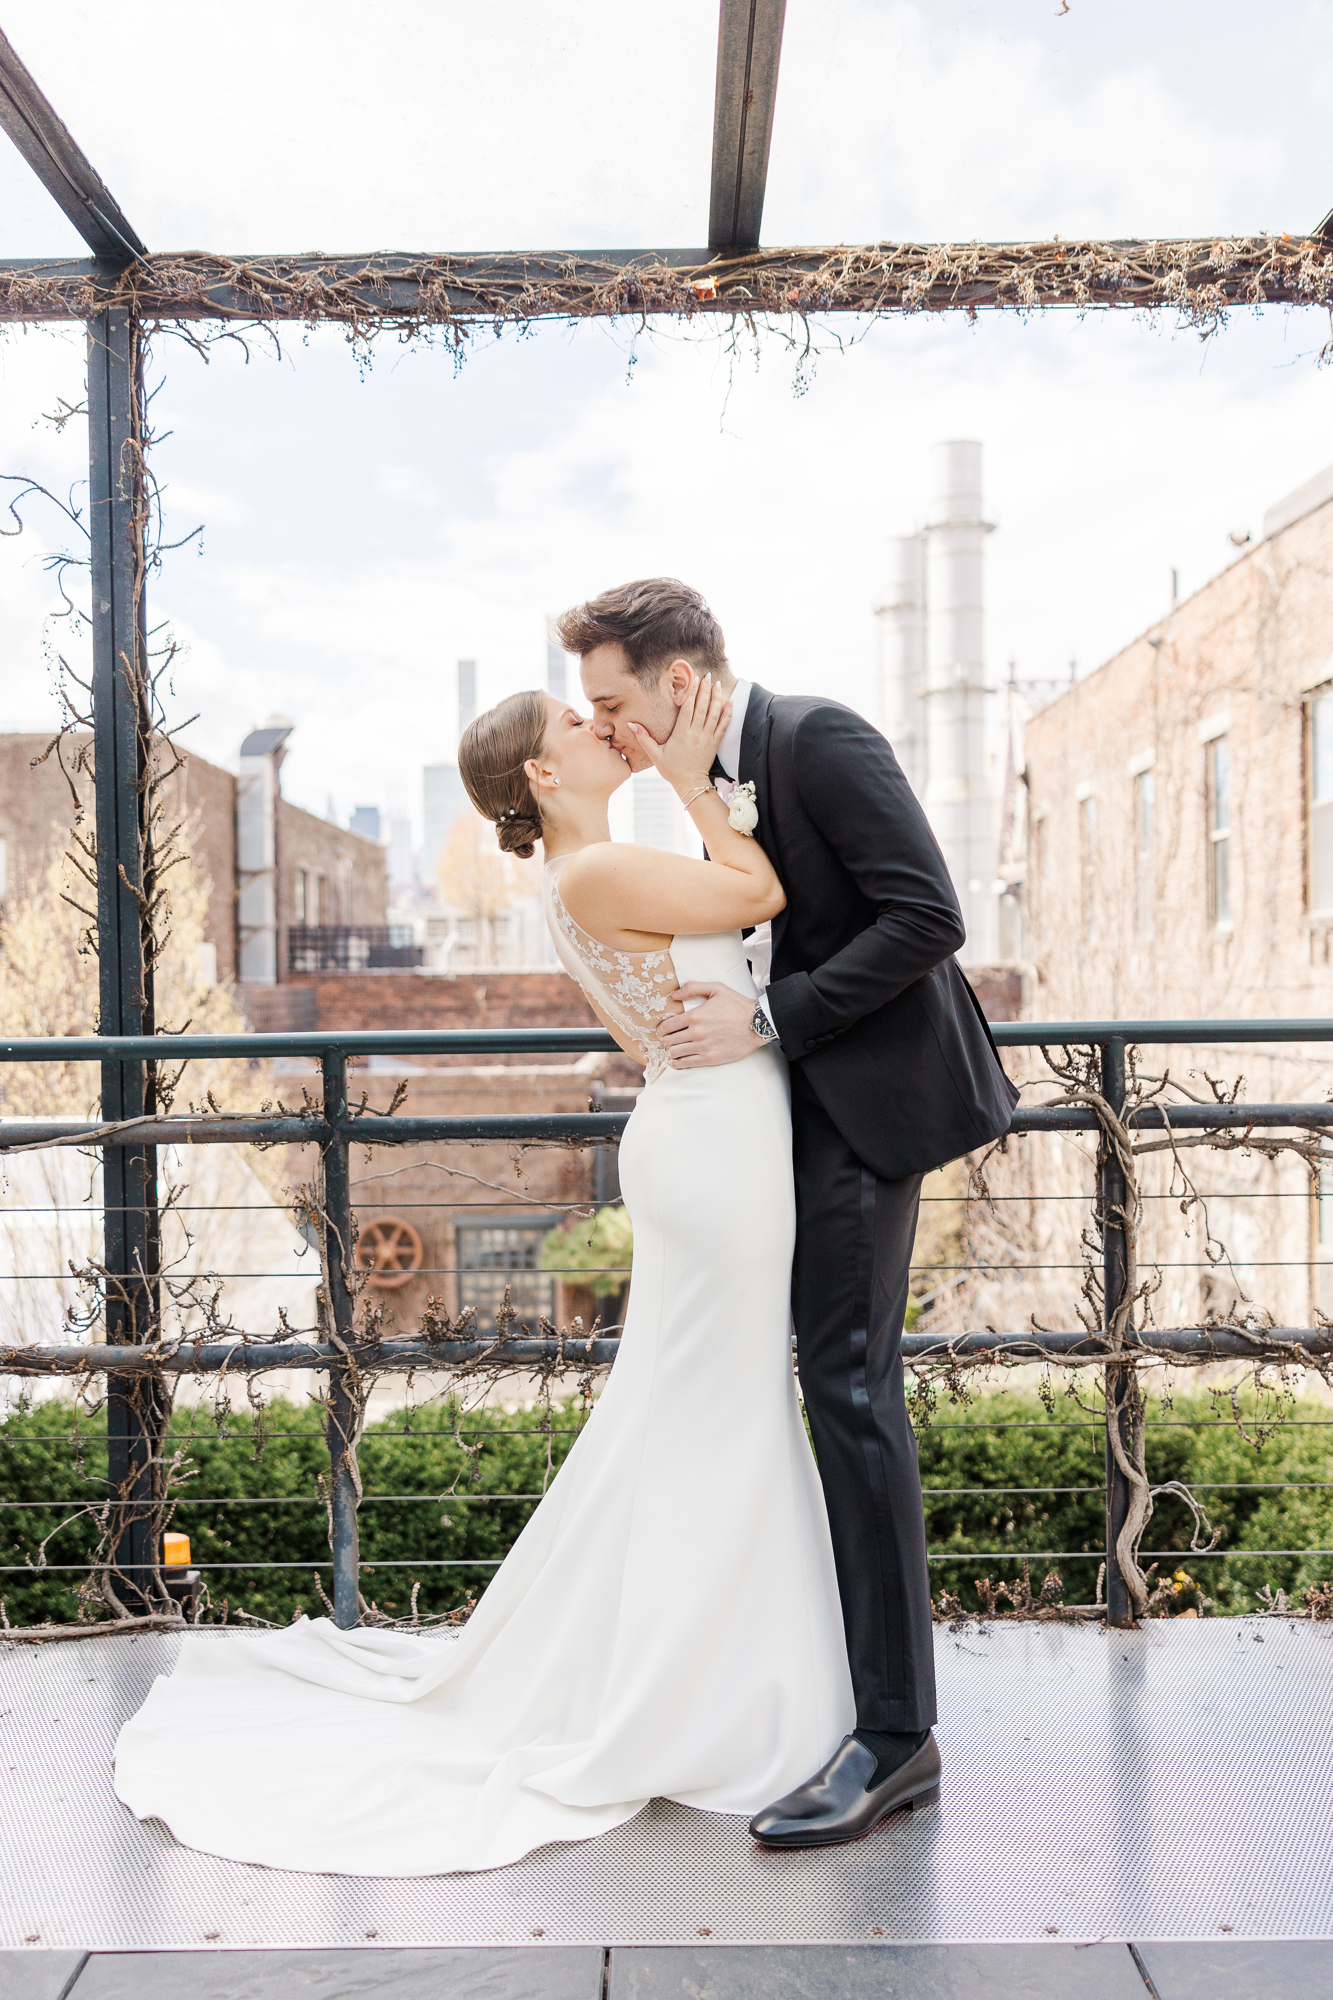 Cheerful Springtime Foundry Wedding In NYC